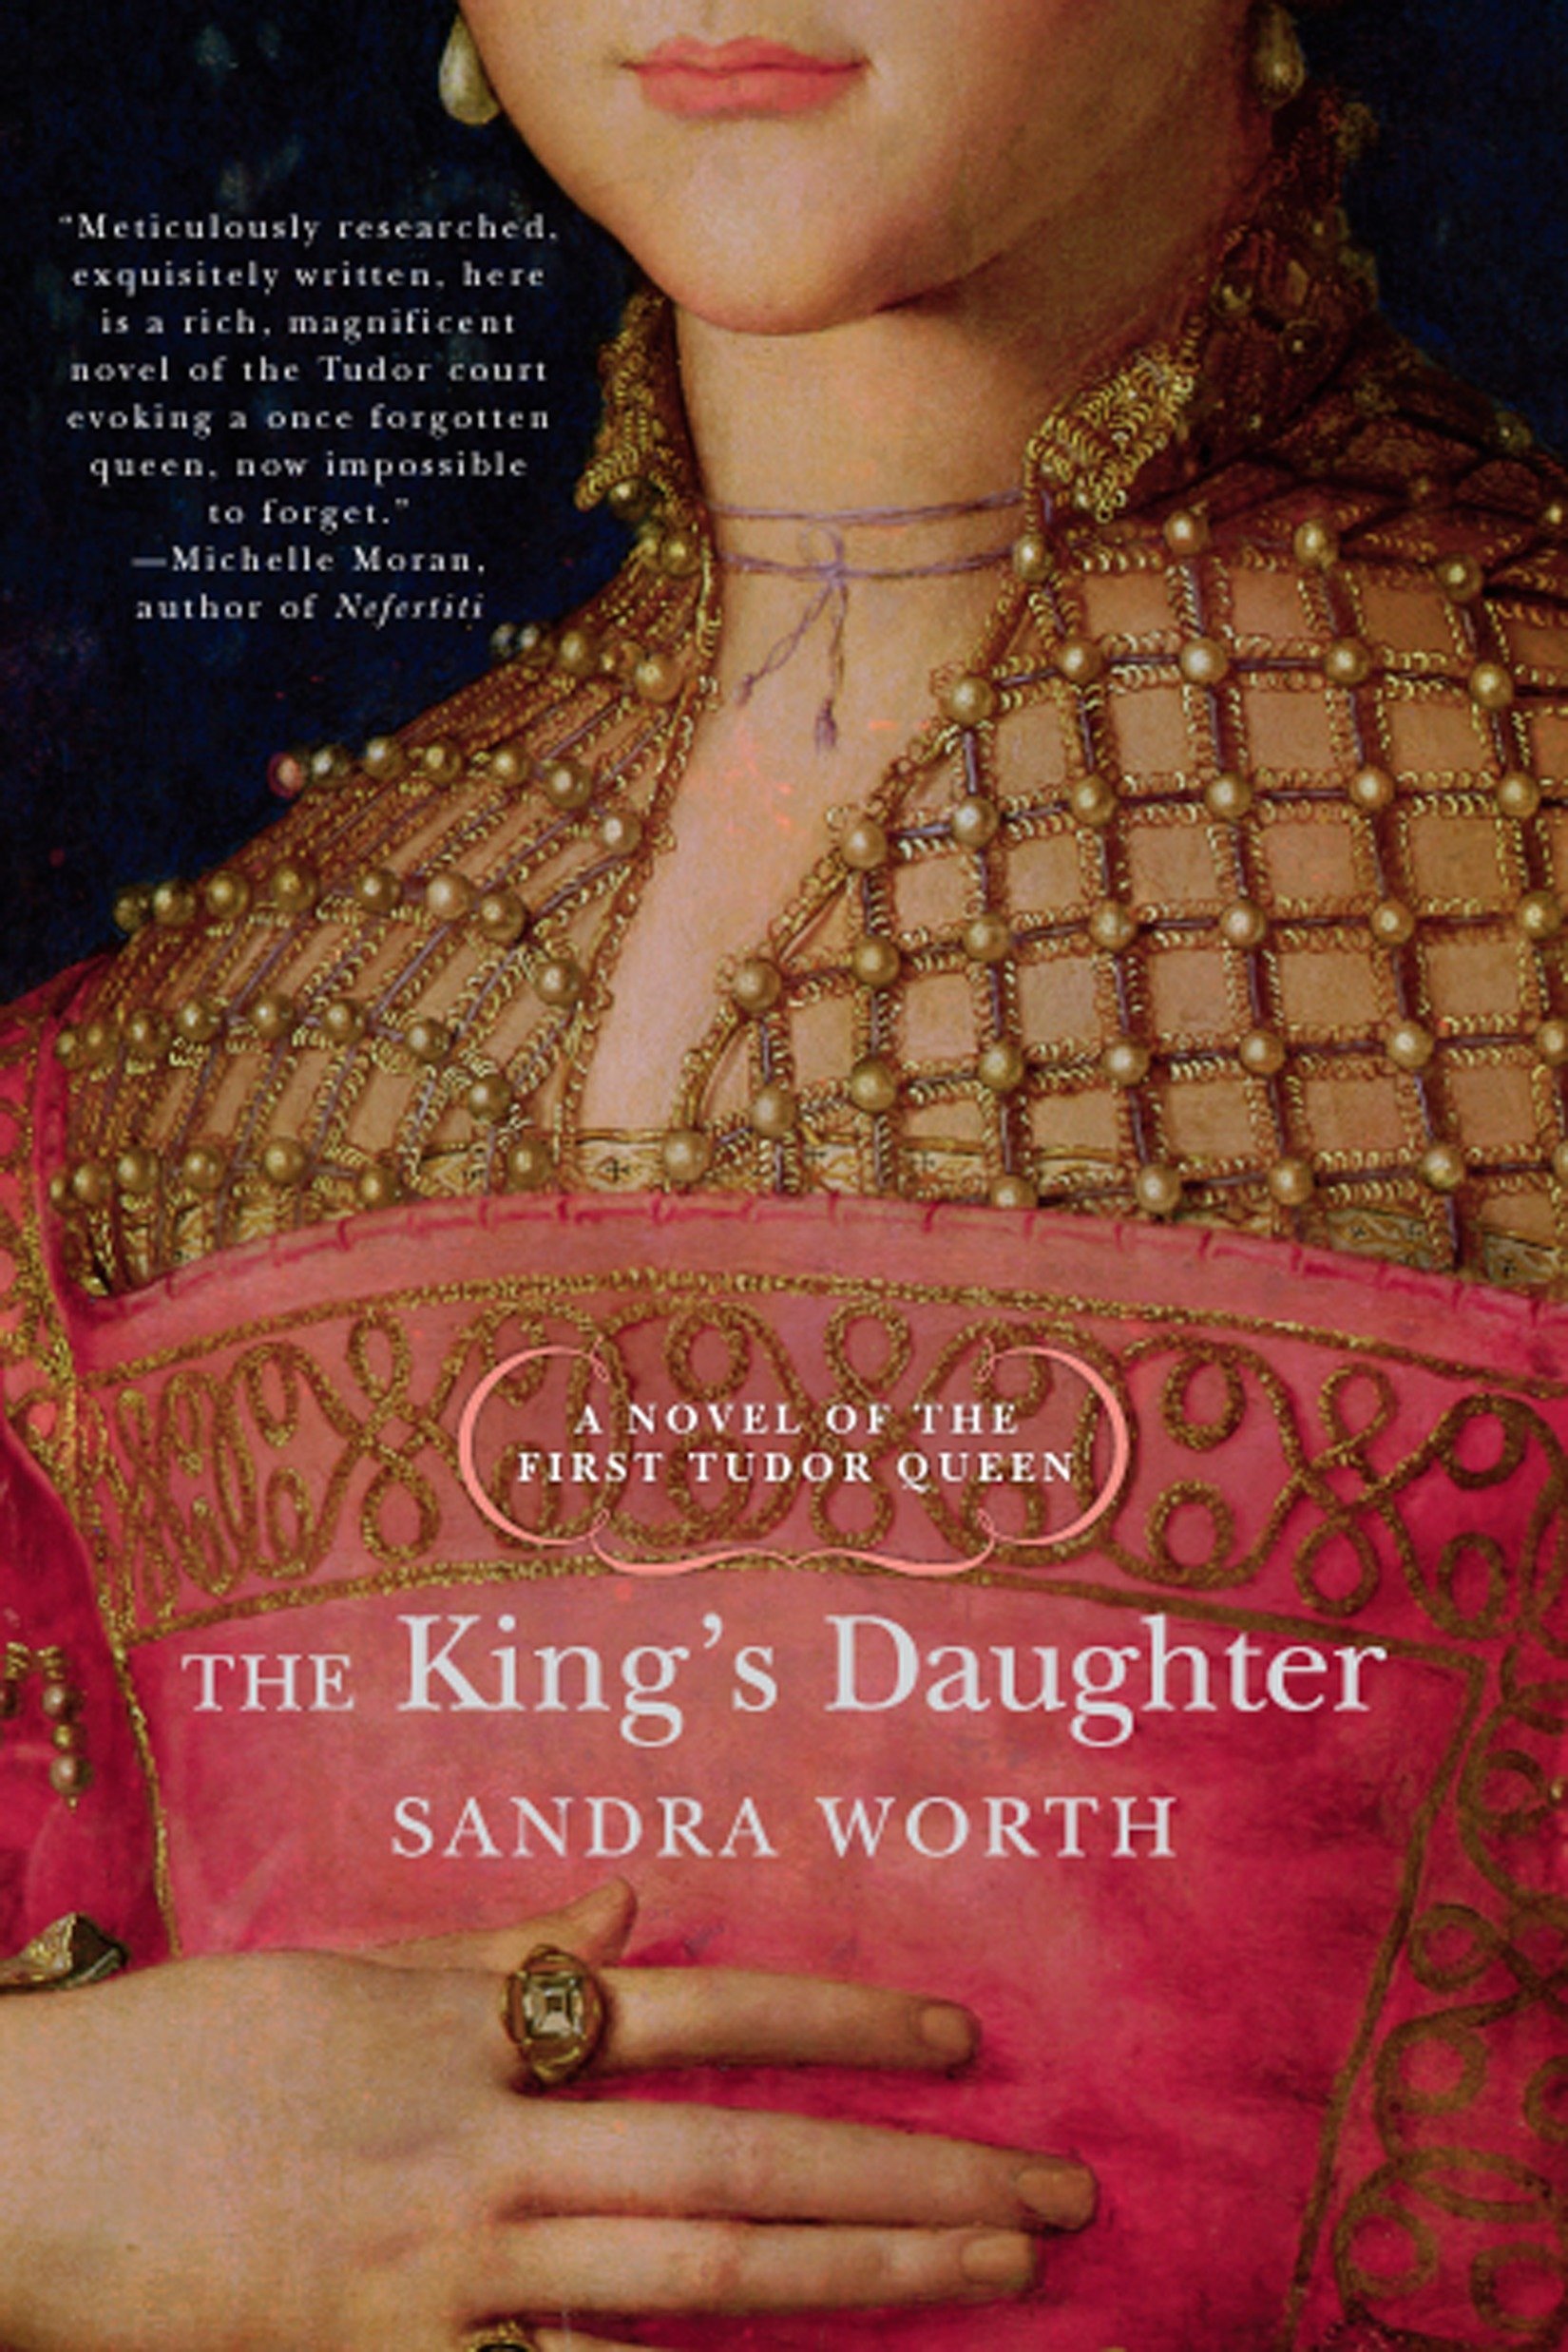 The King's Daughter. A Novel of the First Tudor Queen